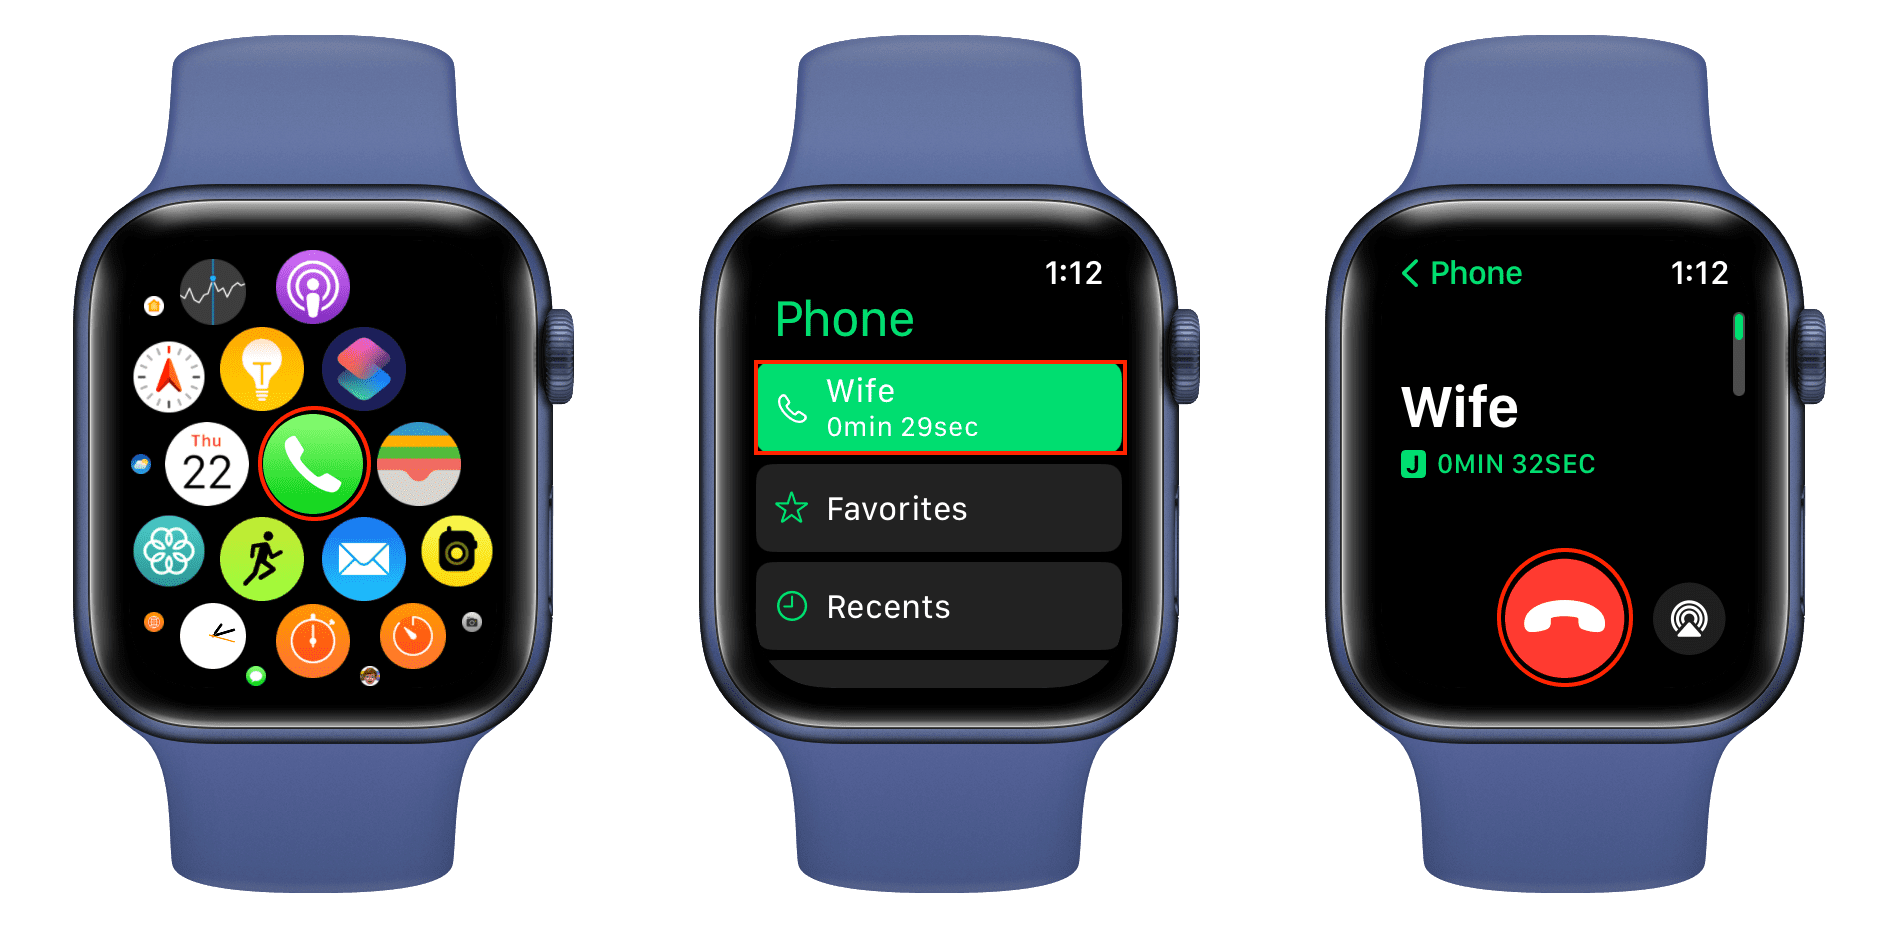 End iPhone call using your Apple Watch